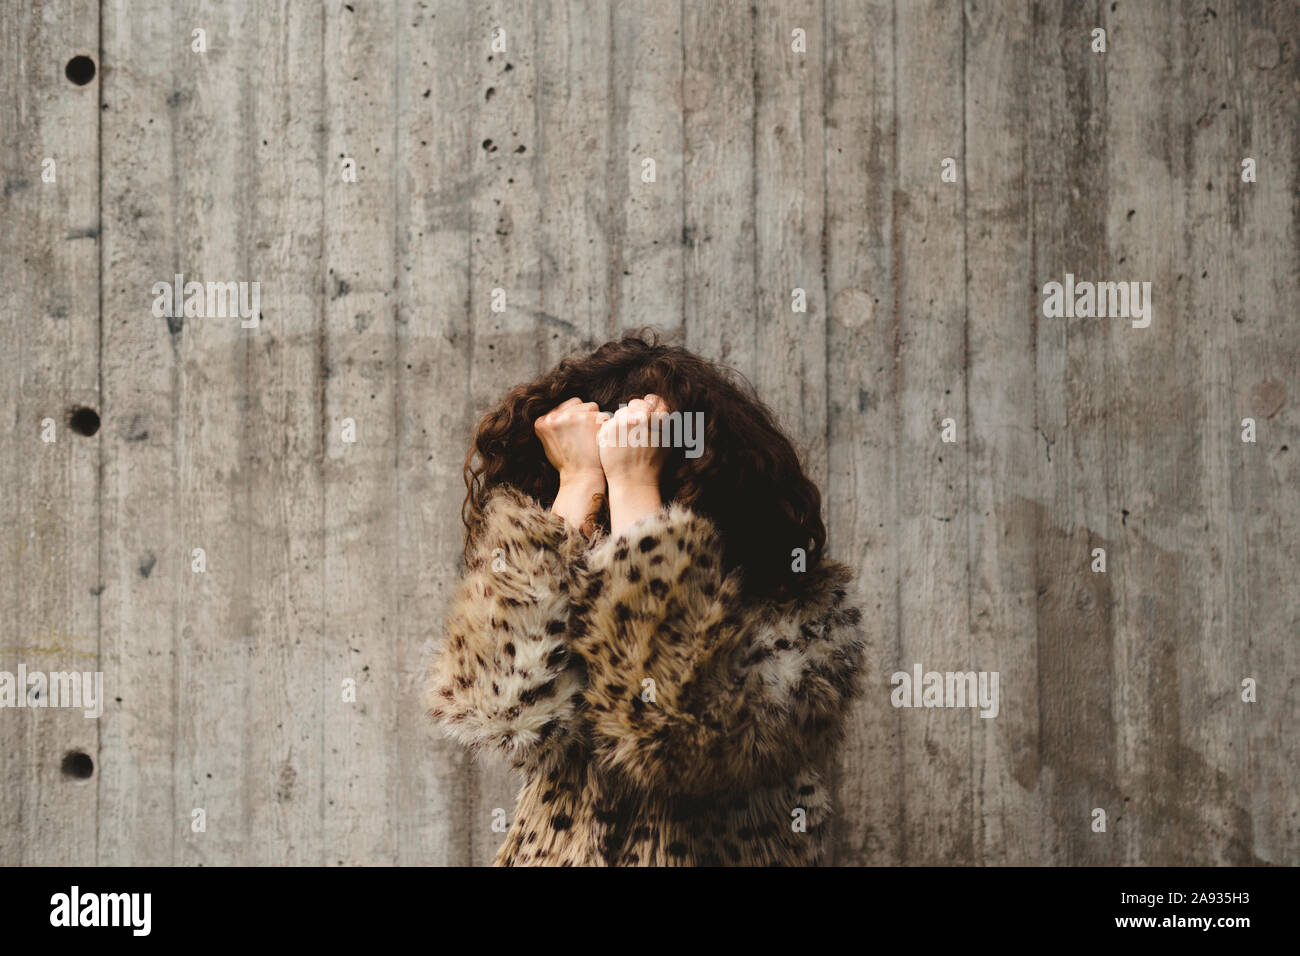 Woman covering her face Stock Photo